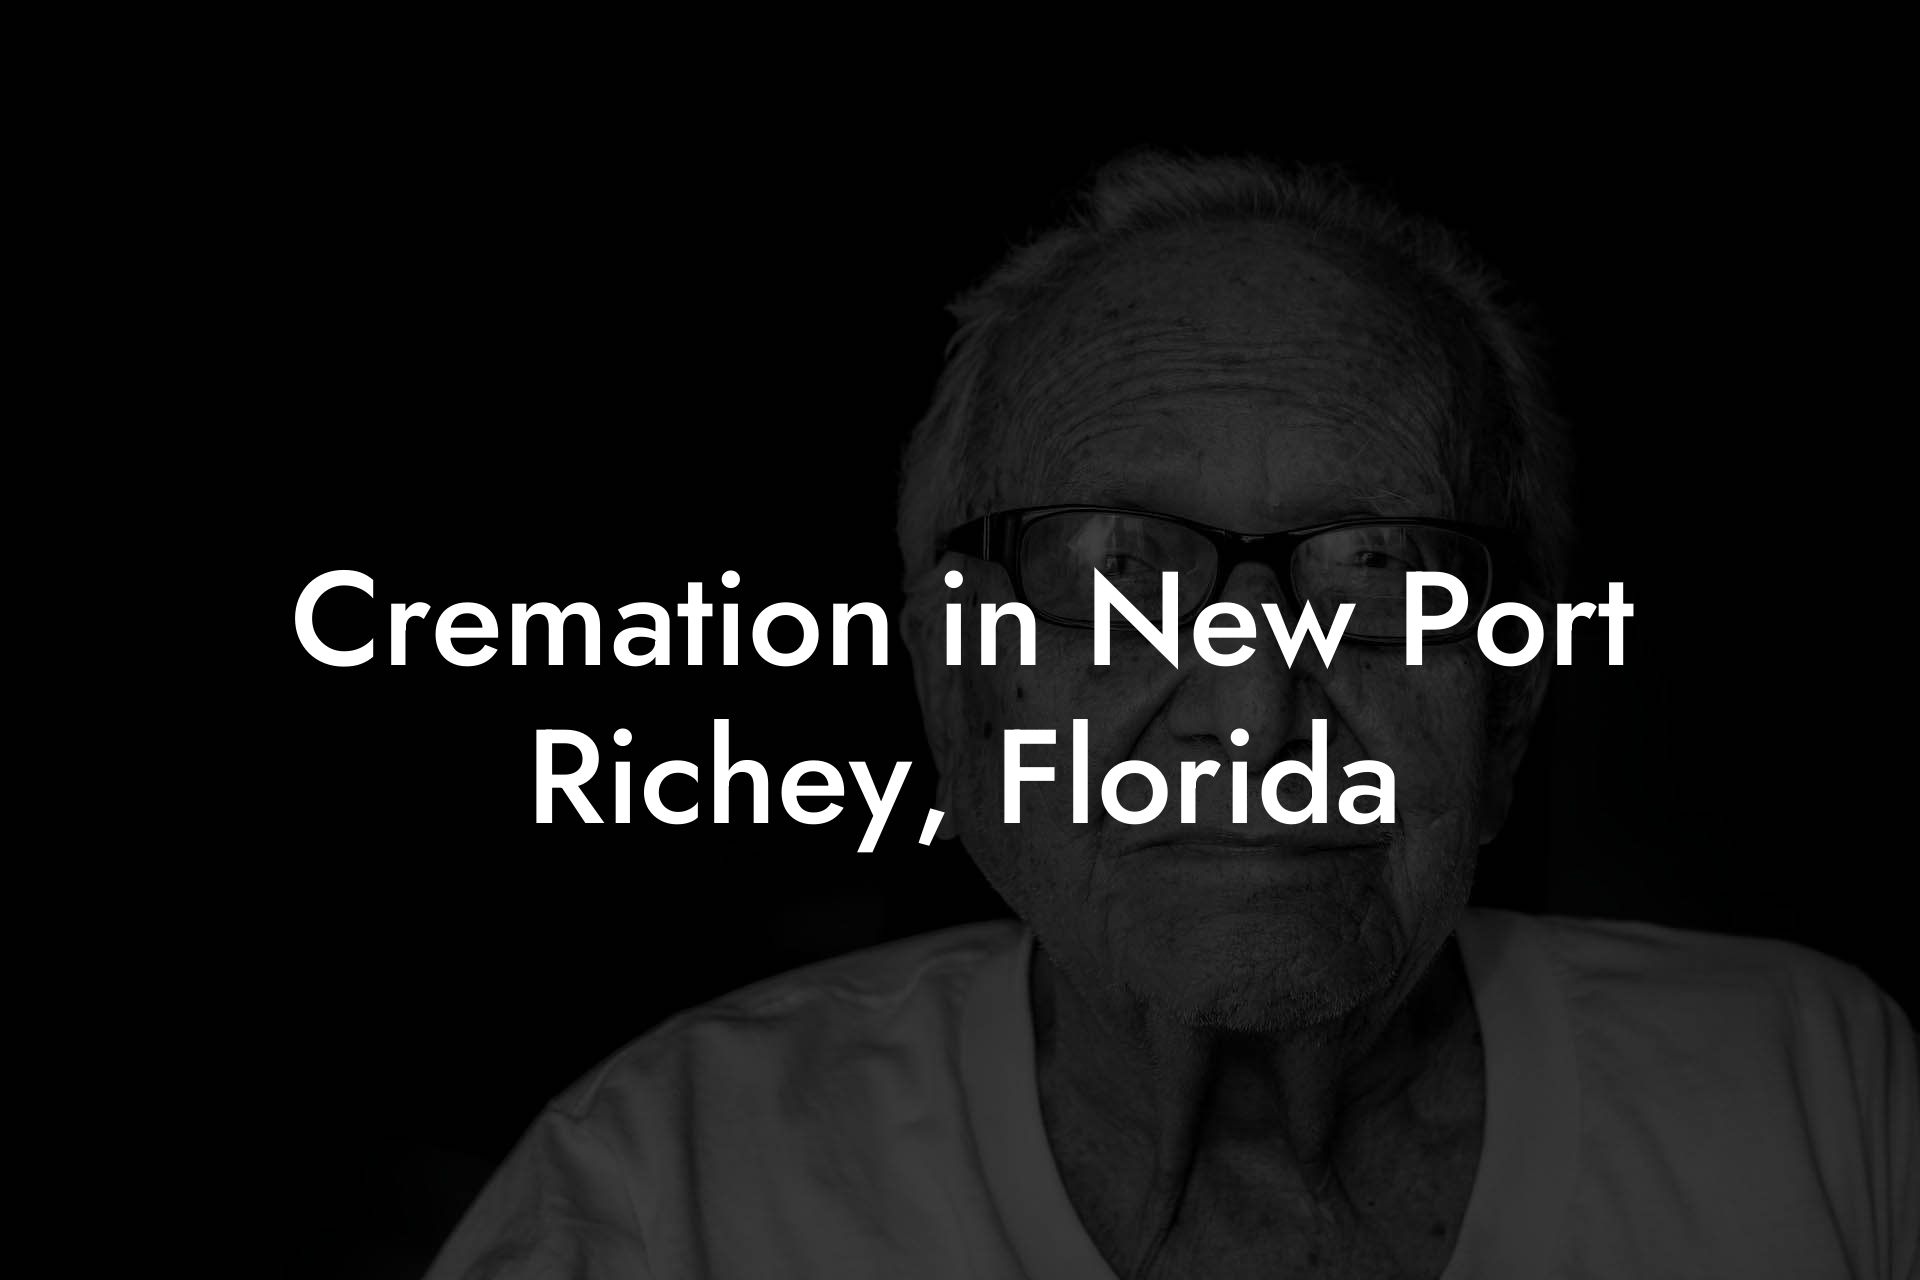 Cremation in New Port Richey, Florida